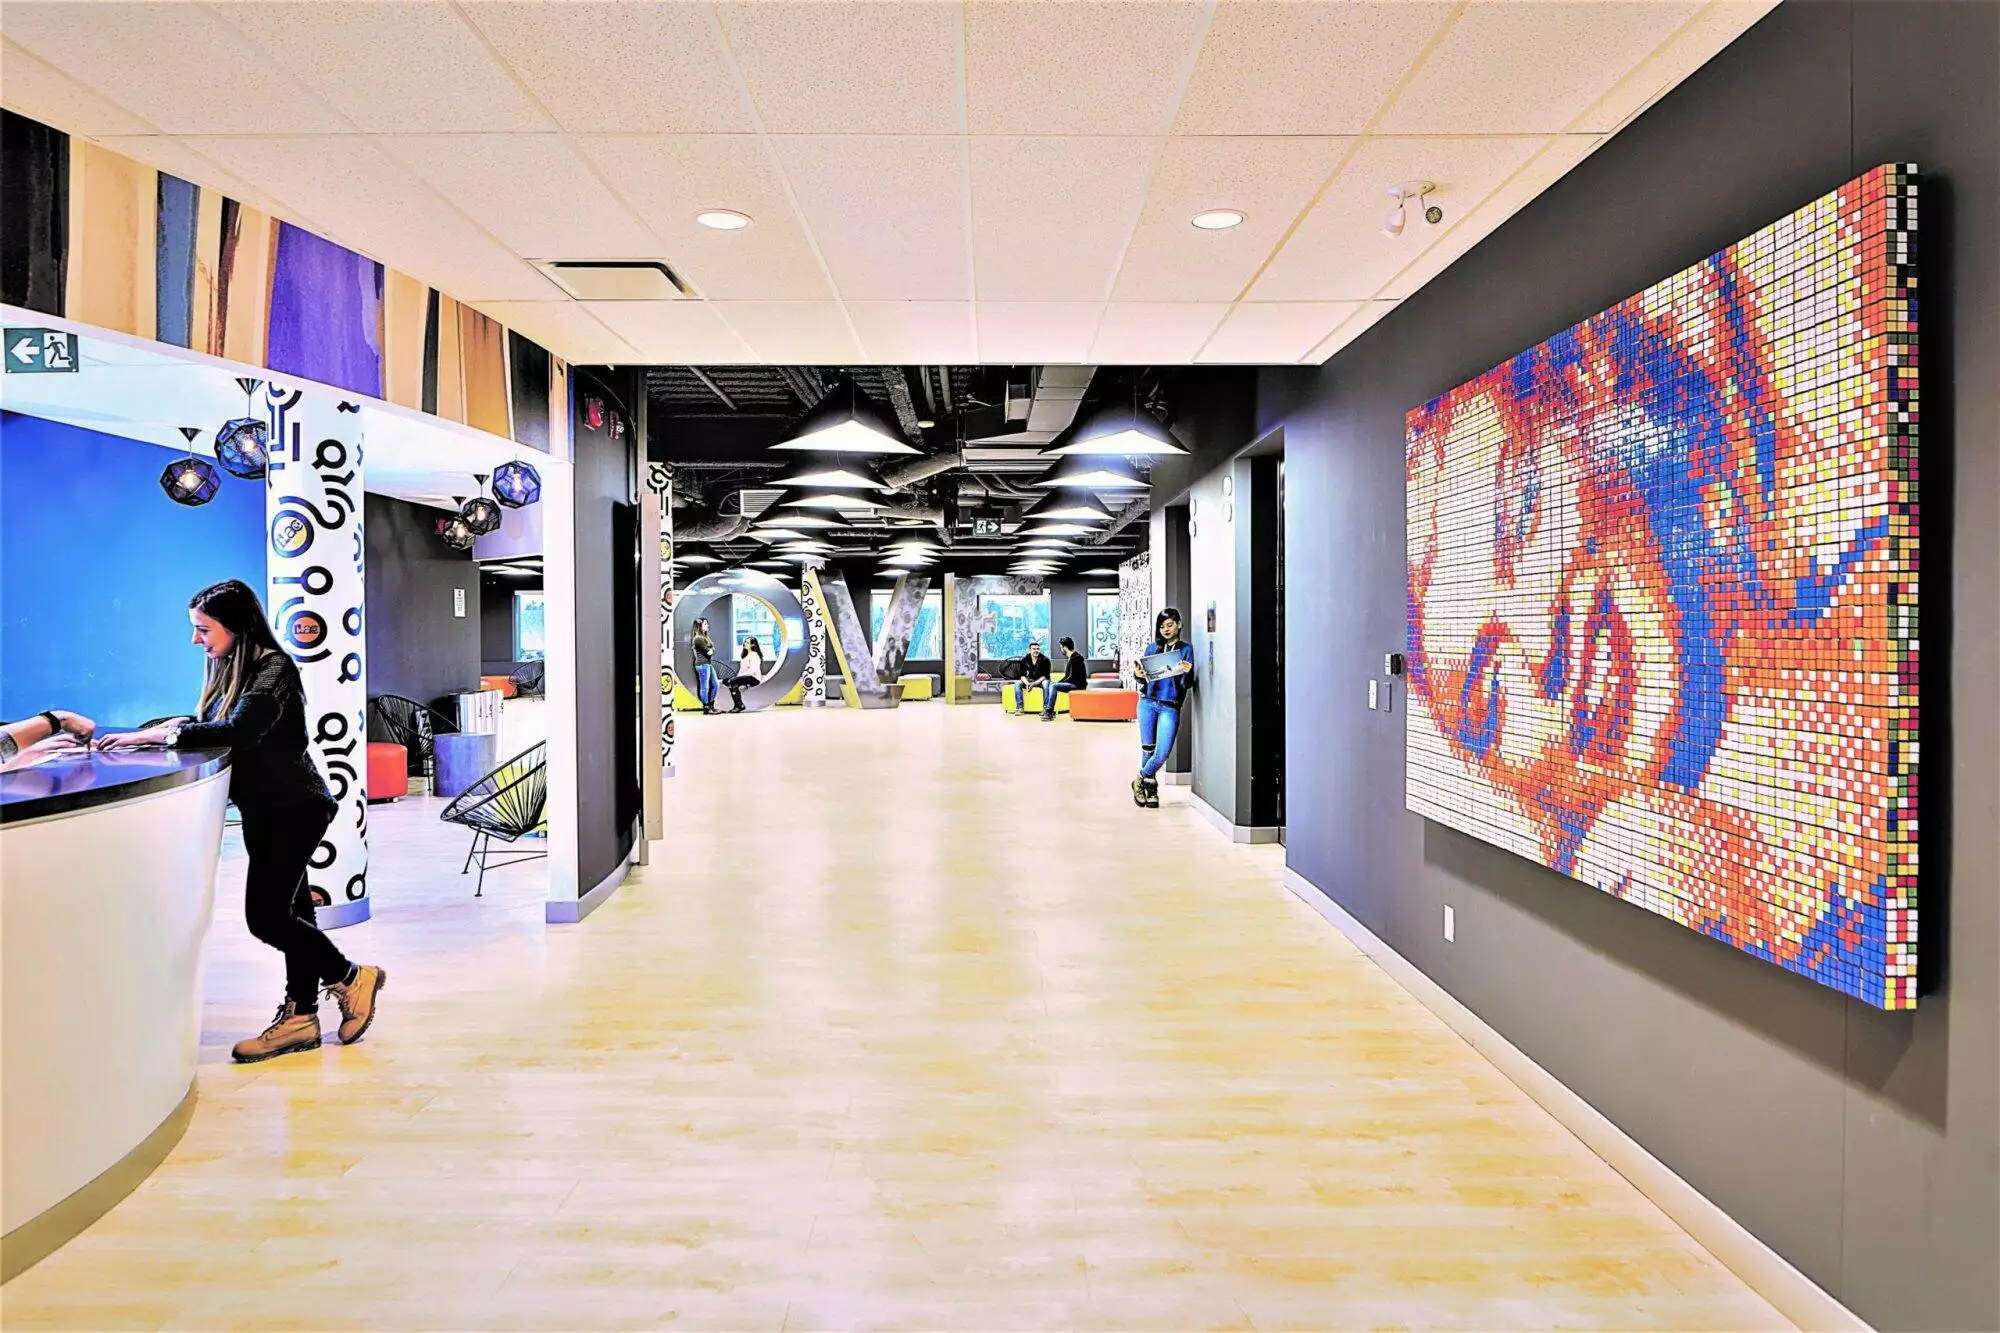 A vibrant office lobby with colorful decor, modern digital art on the walls influenced by lab accreditation themes, and people walking and working at reception desks.